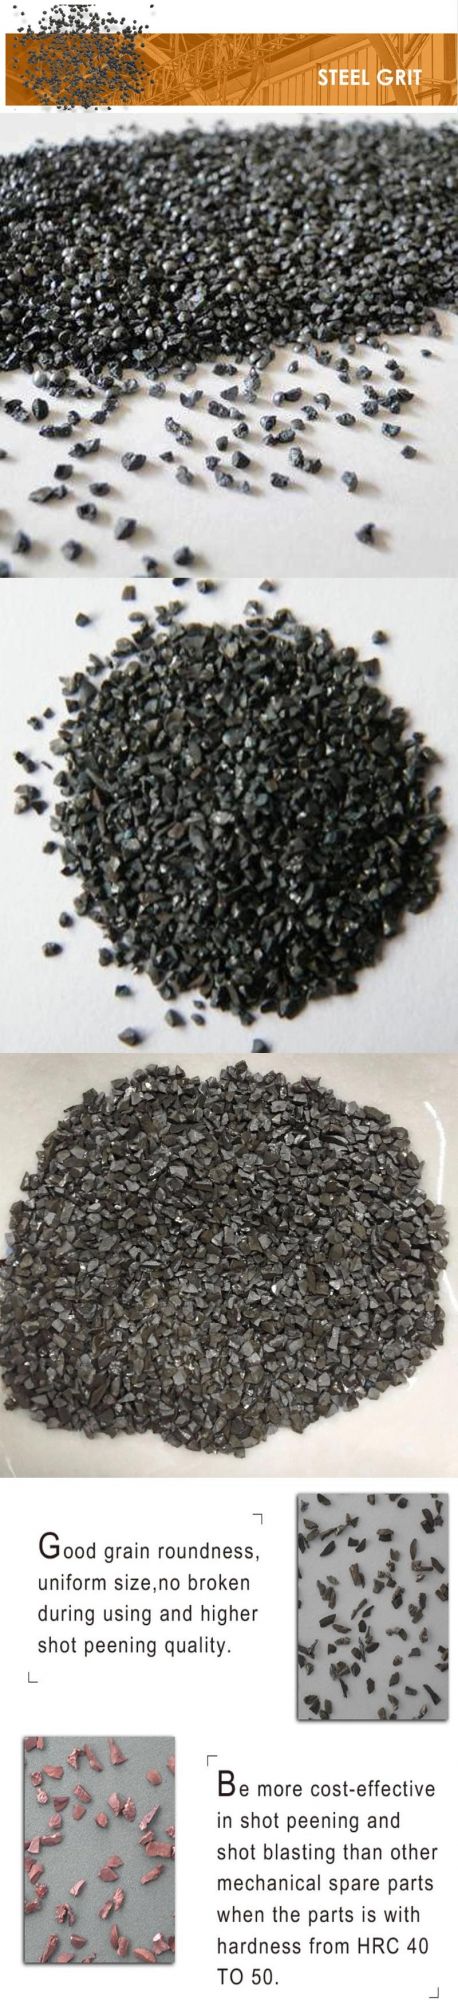 Cast Steel Grit G80 for Surface Treatment with High Quality